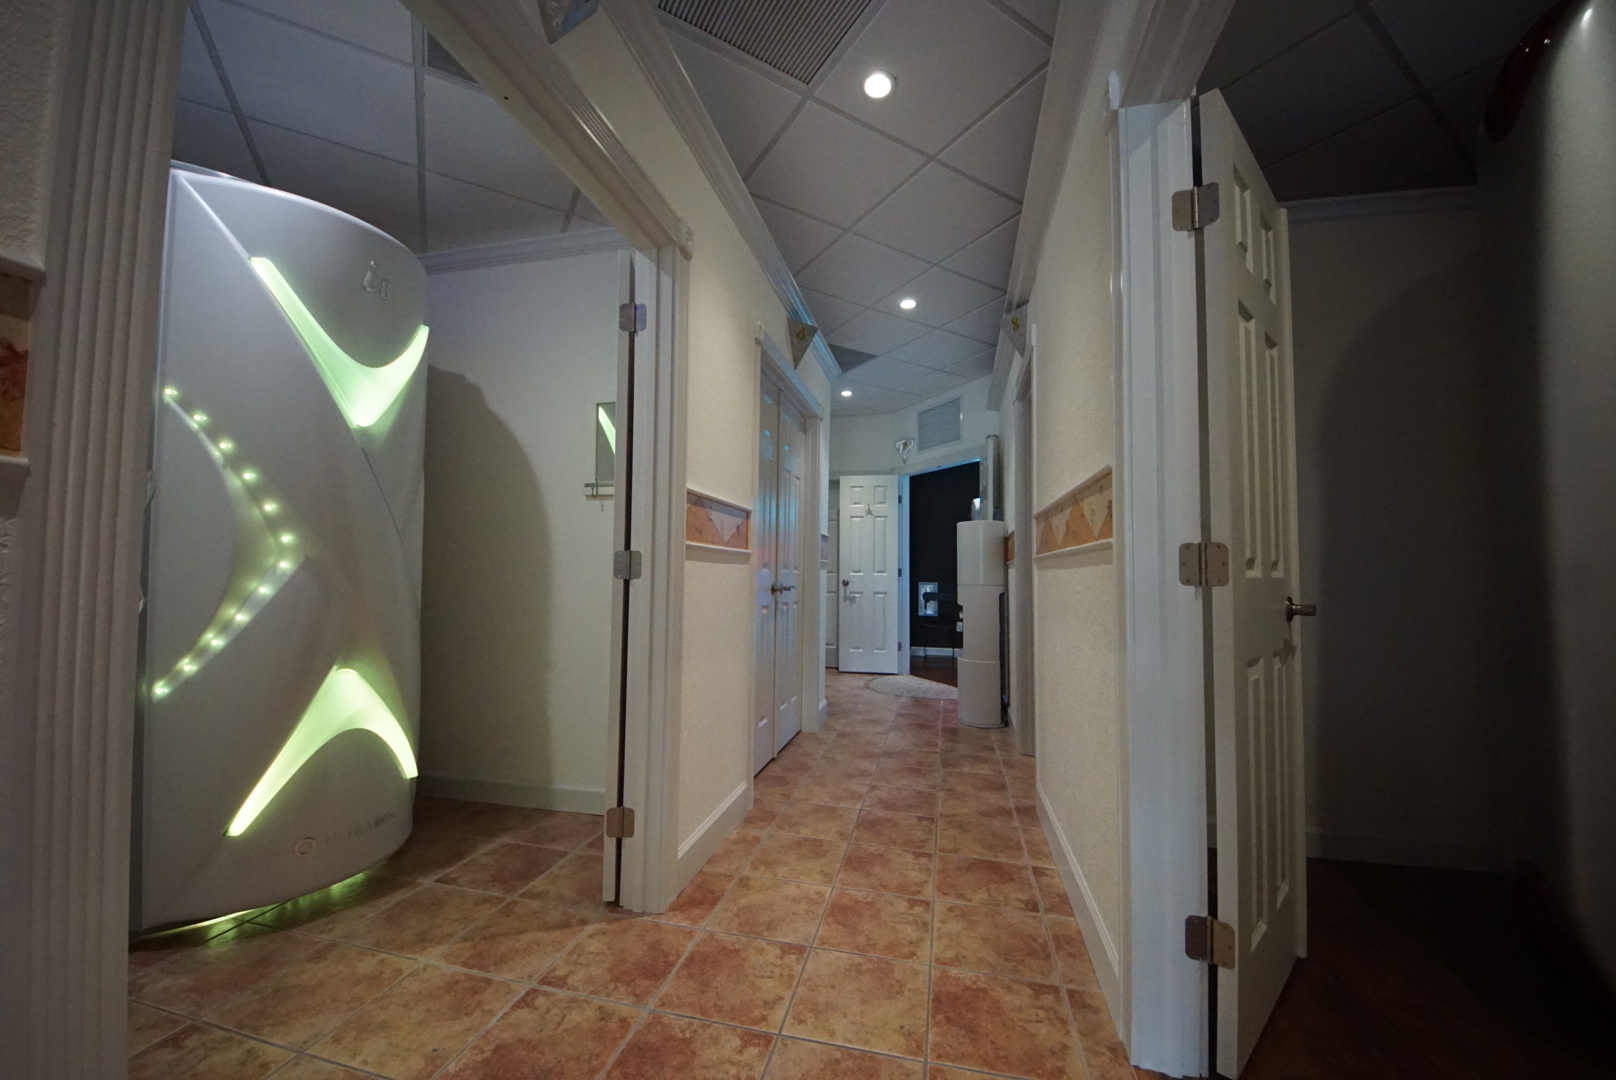 A hallway with many doors and lights on the wall.